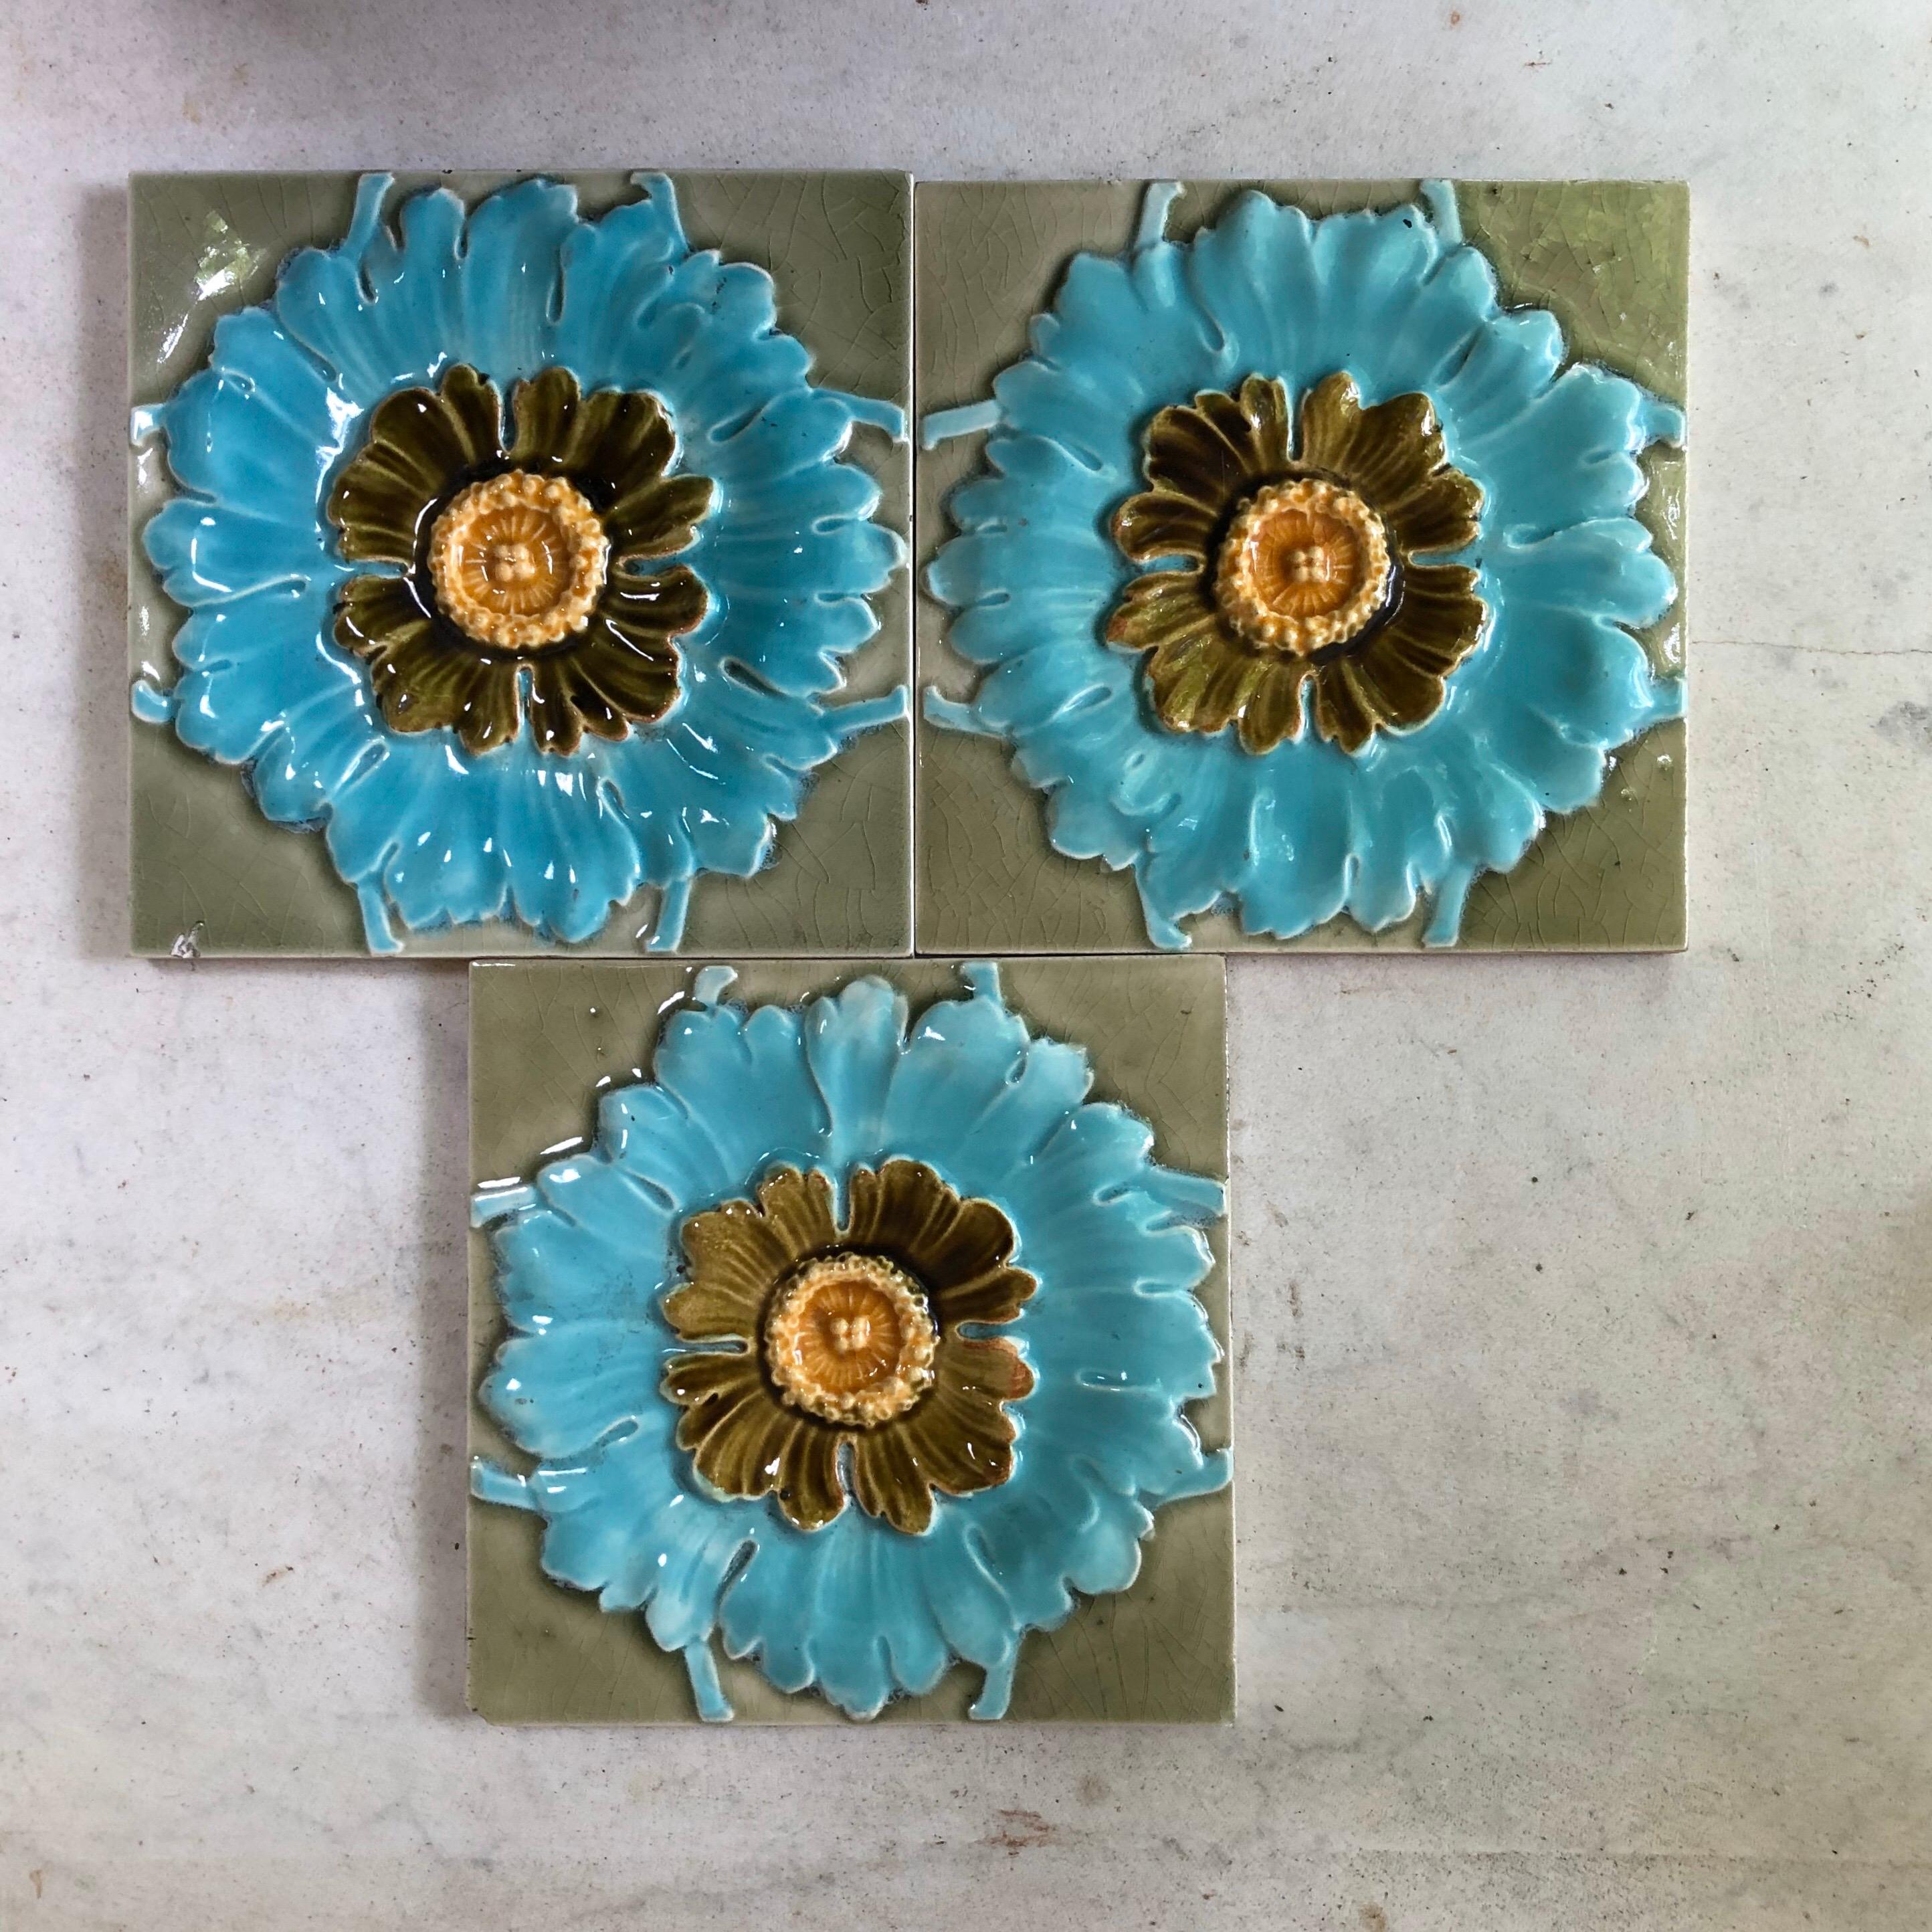 Late 19th Century French Majolica Flowers Tile, circa 1890